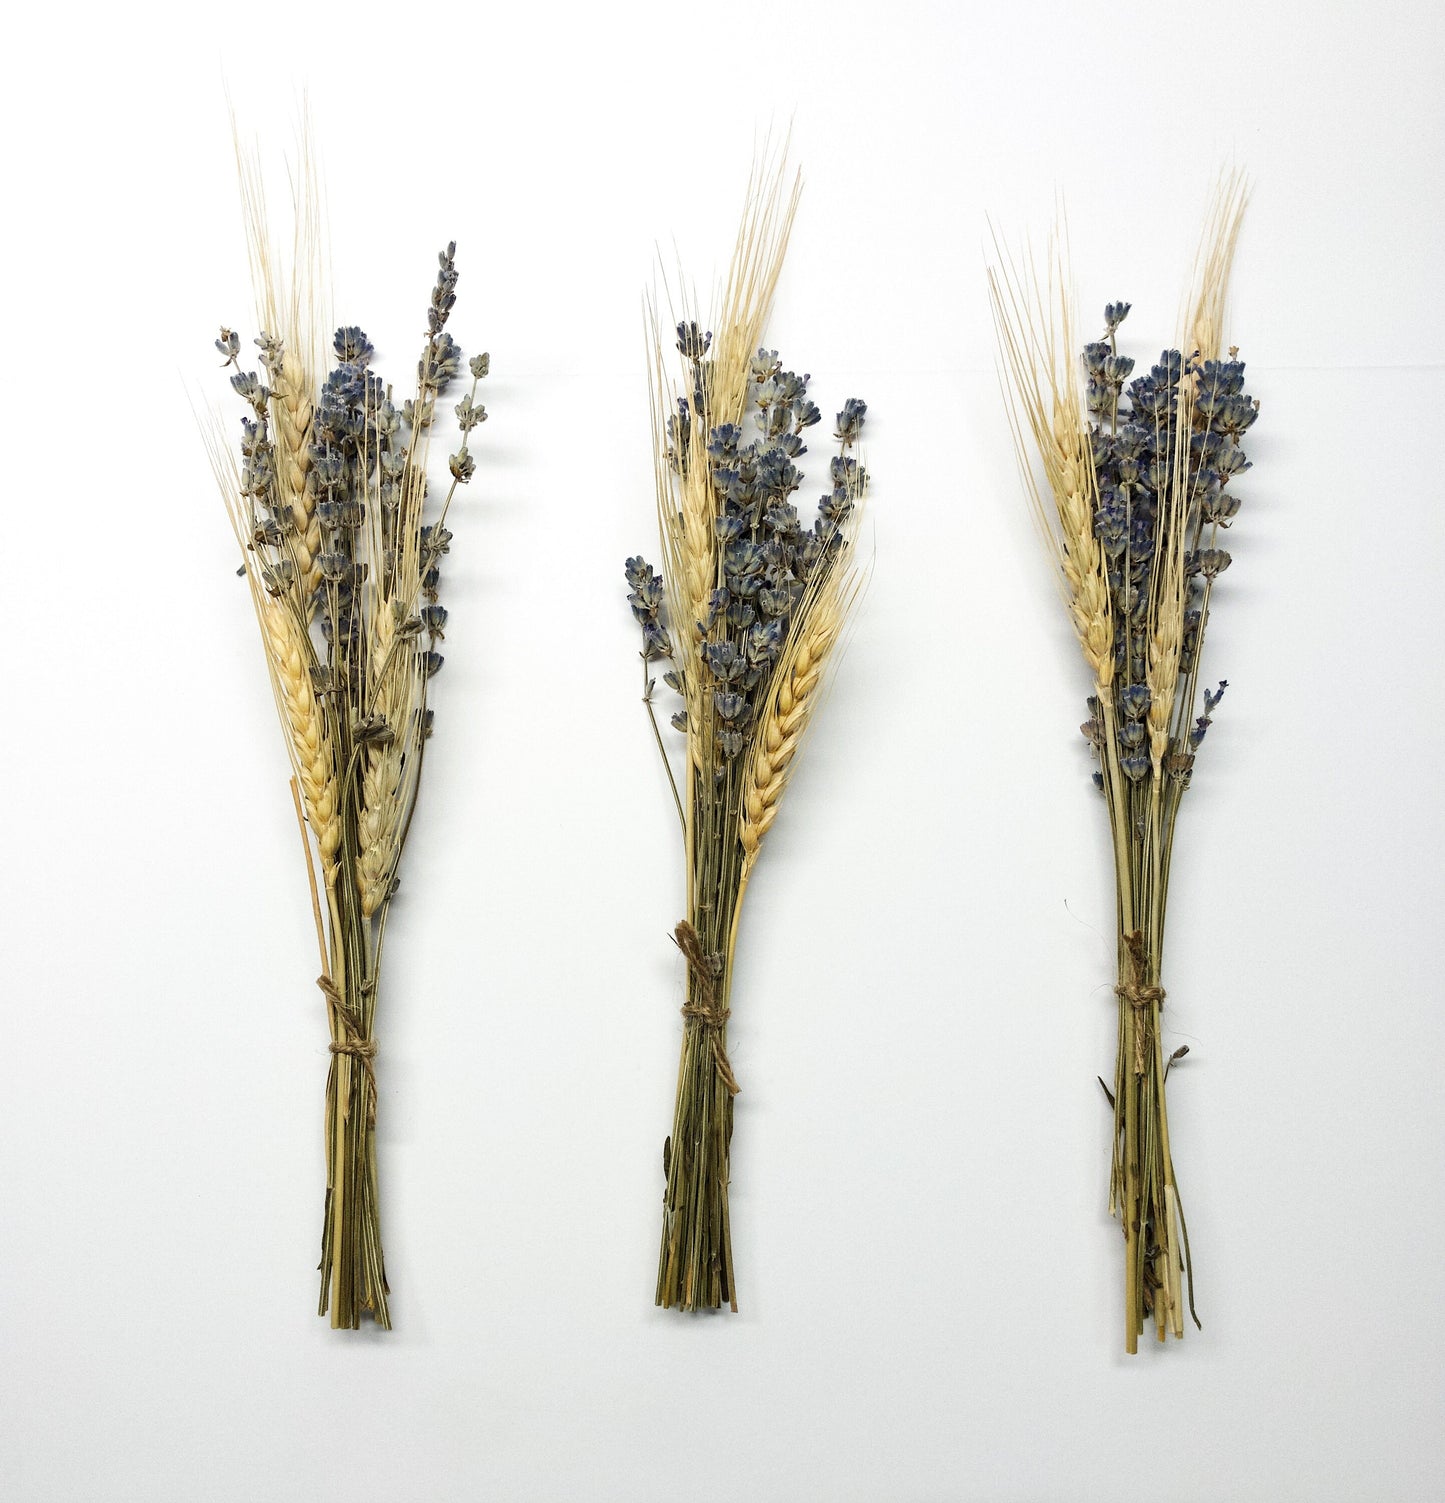 Party Favors, Lavender Bunch, Wedding, Wheat, Dried Flowers, Twine, Party Decor, Bridal, Decoration, Gift, Details, GradeB